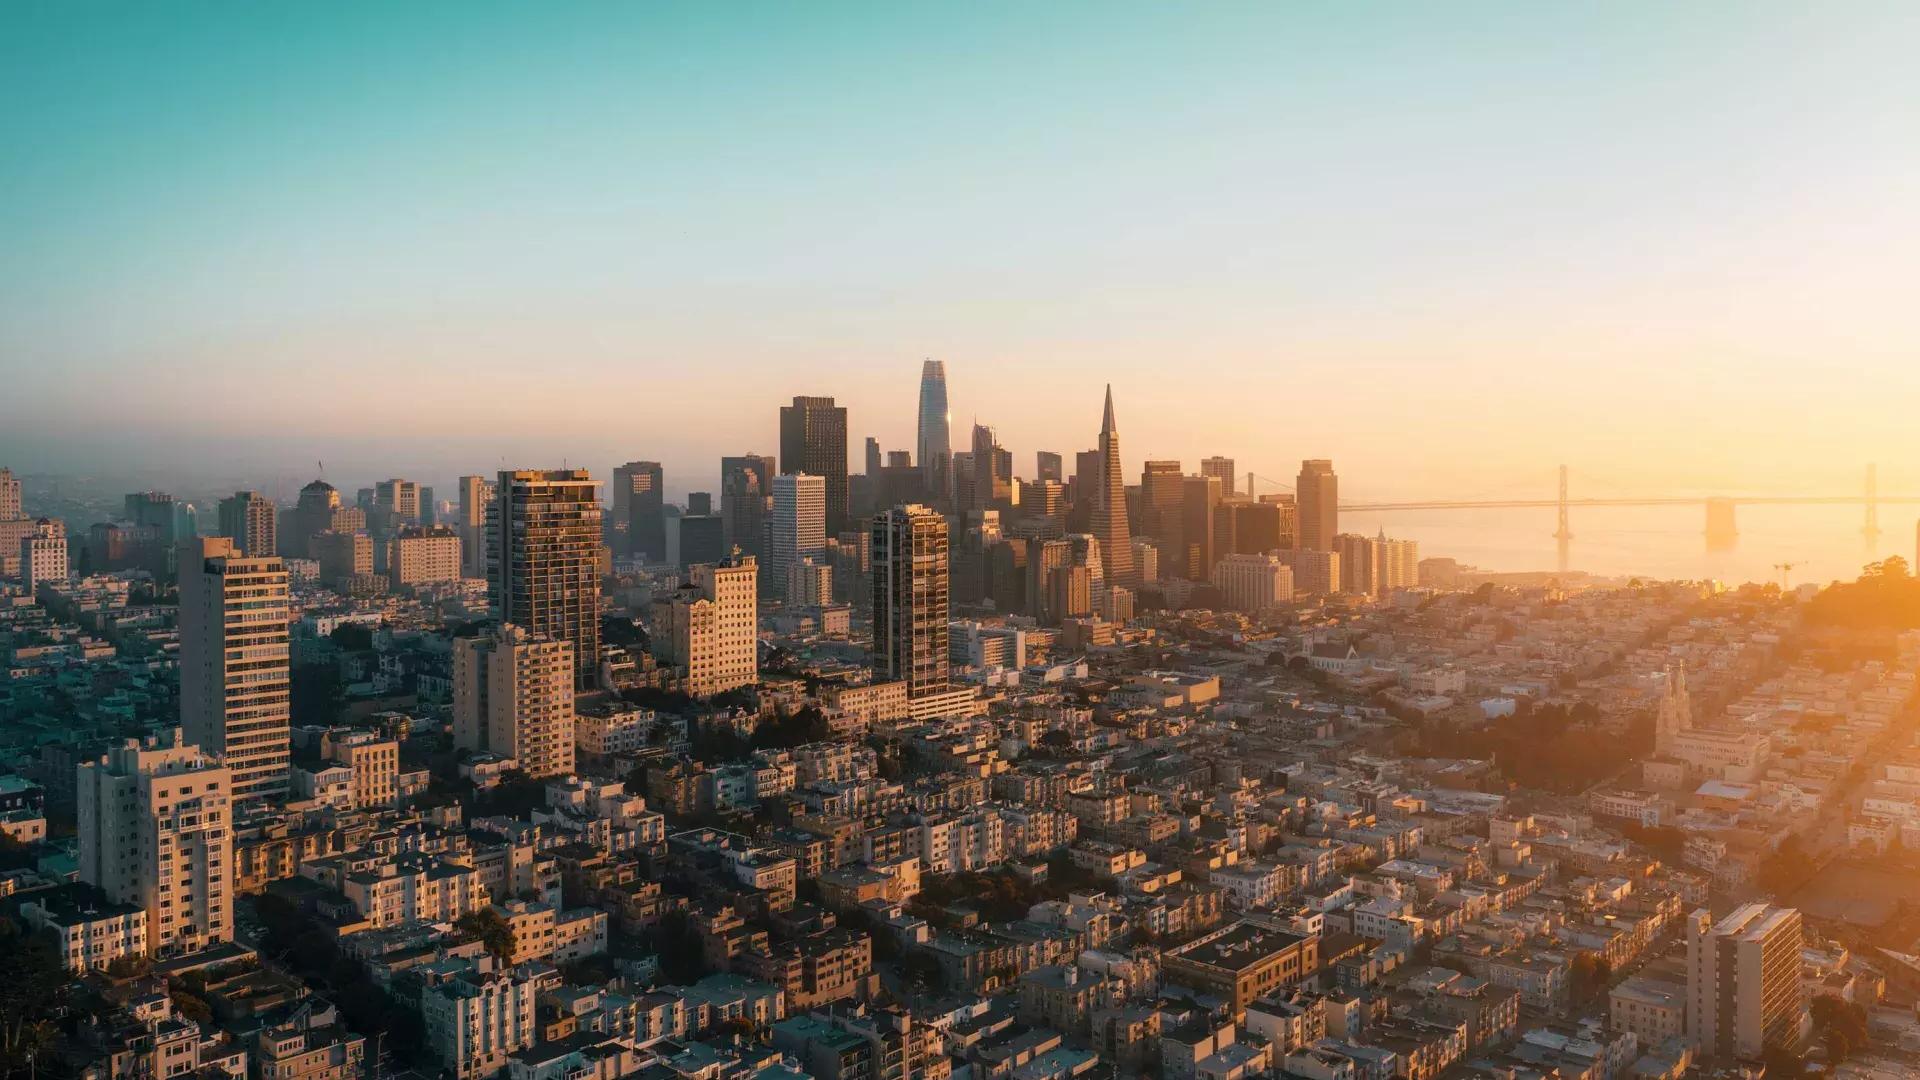 The skyline of San Francisco is seen from the air in a golden light.